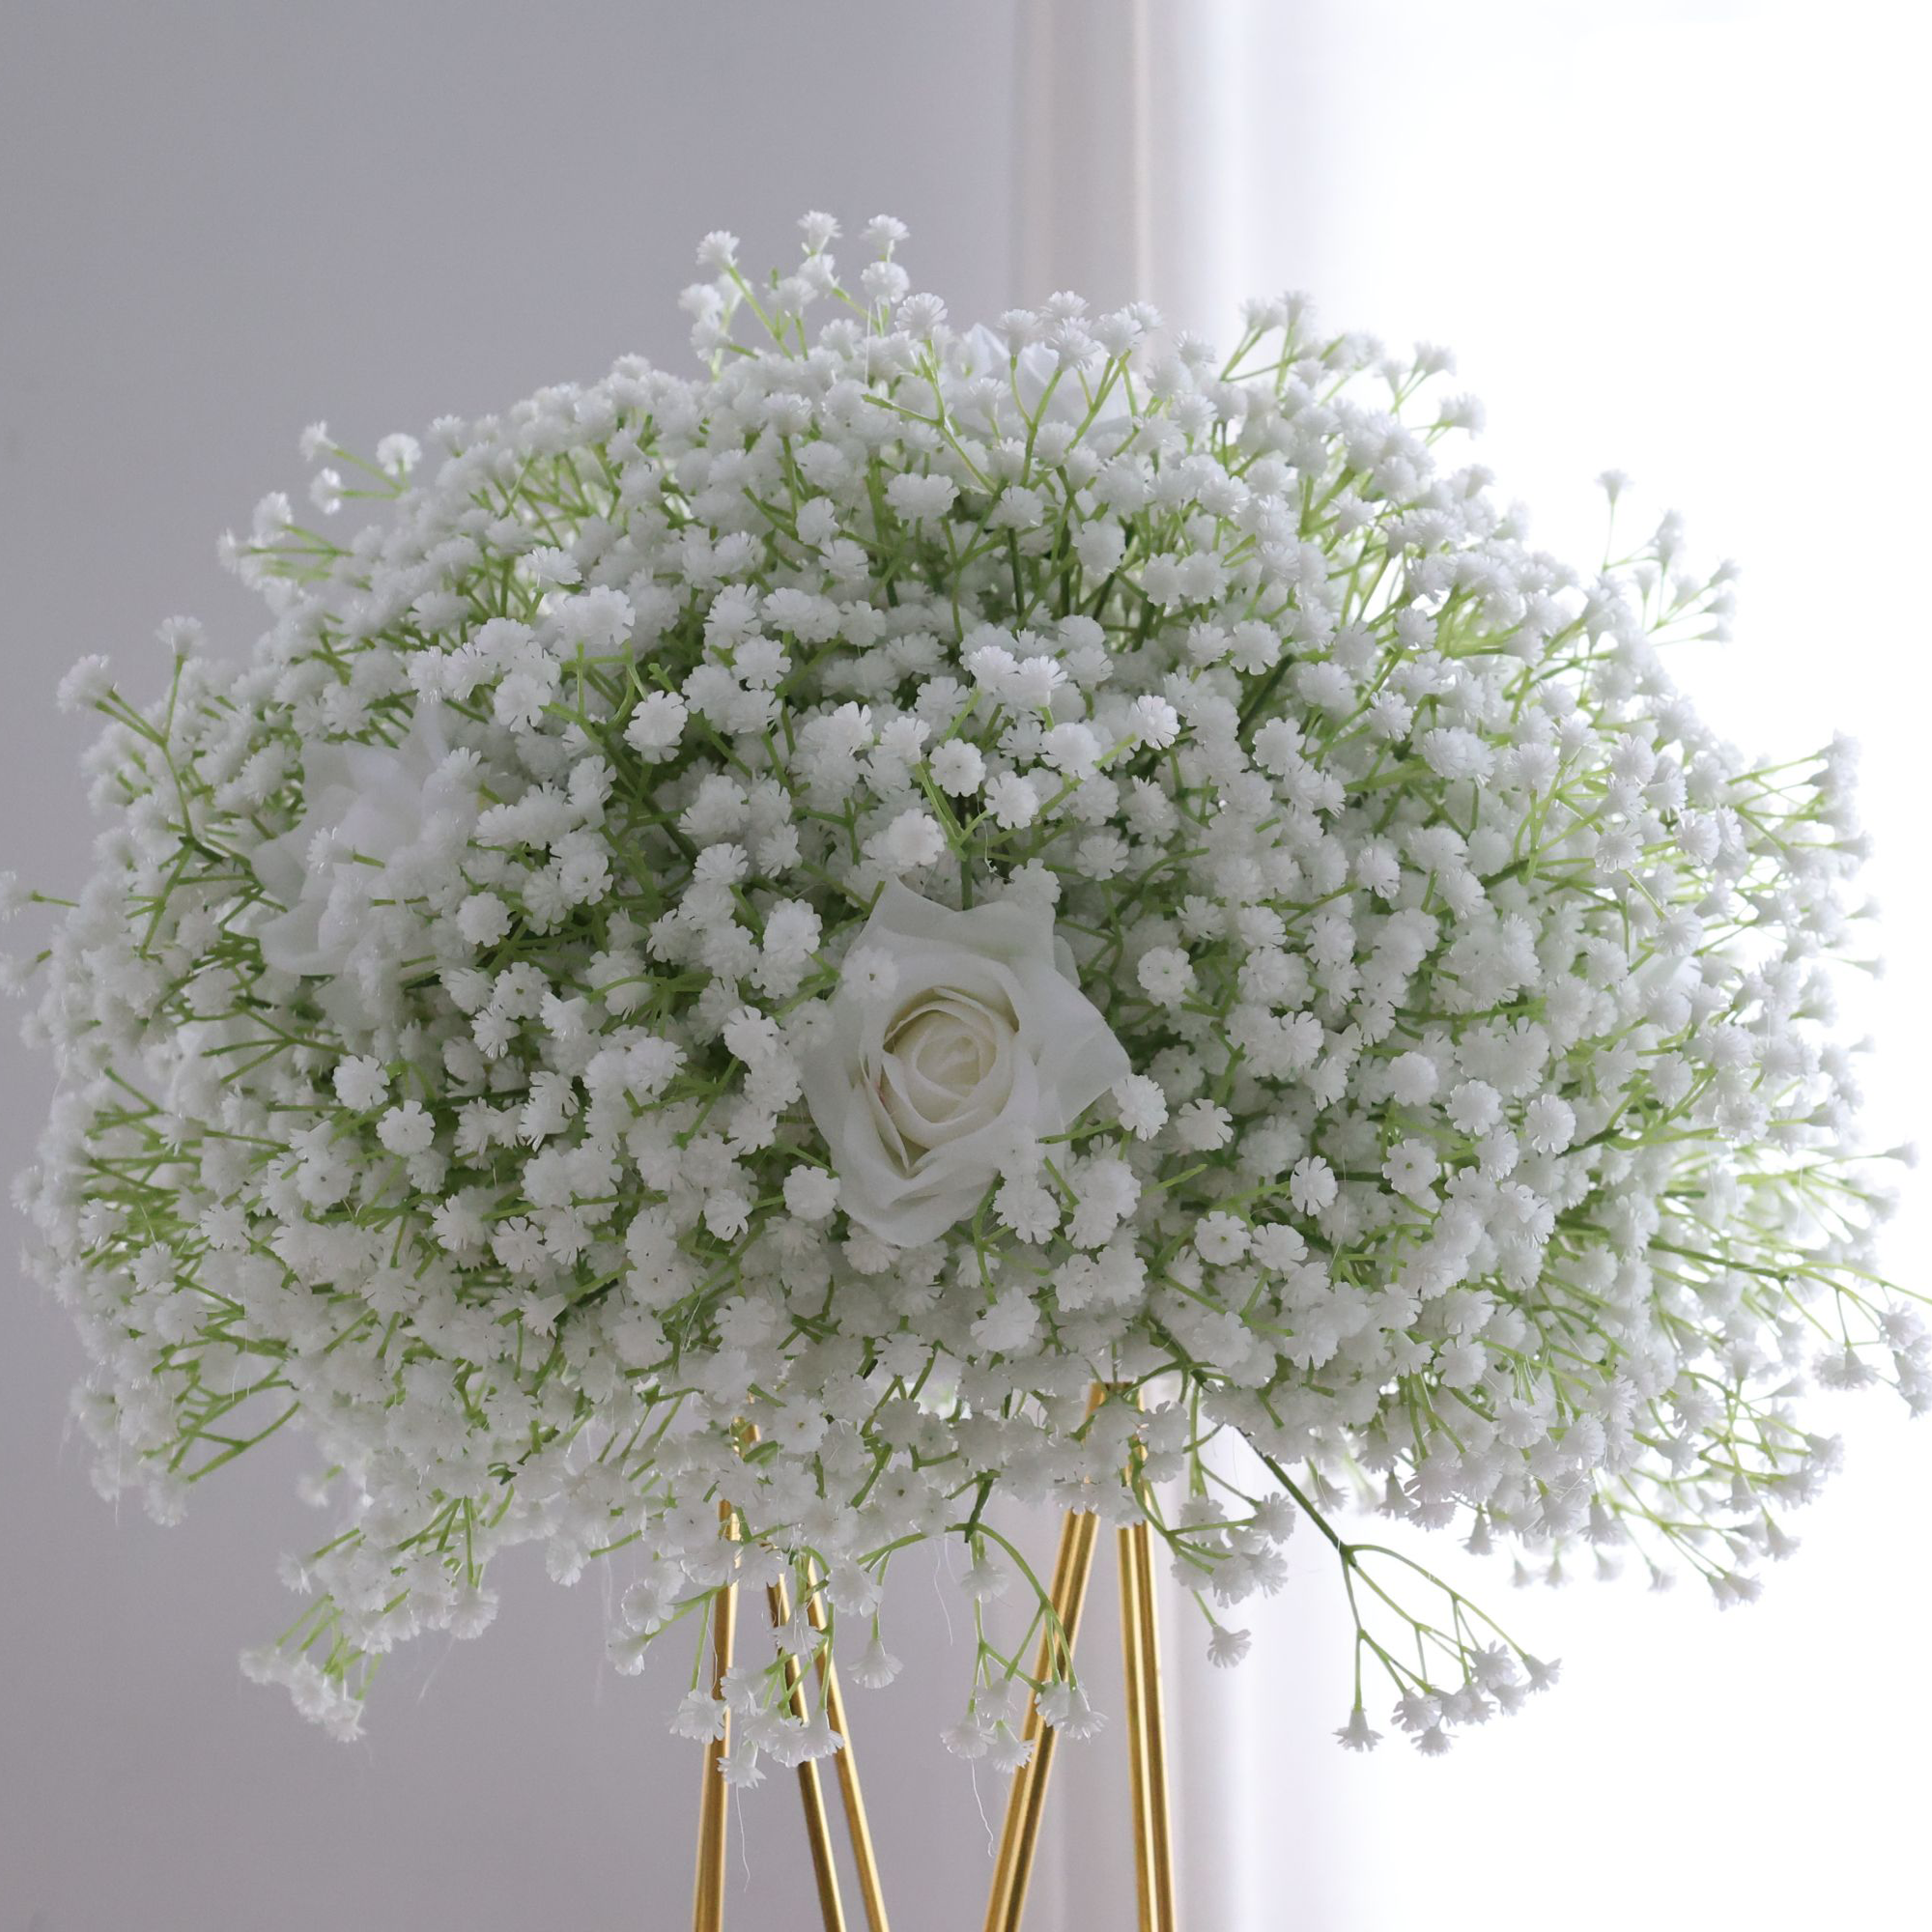 Solitary Elegance - A Delicate White Rose Amidst a Sea of Baby's Breath FB-030